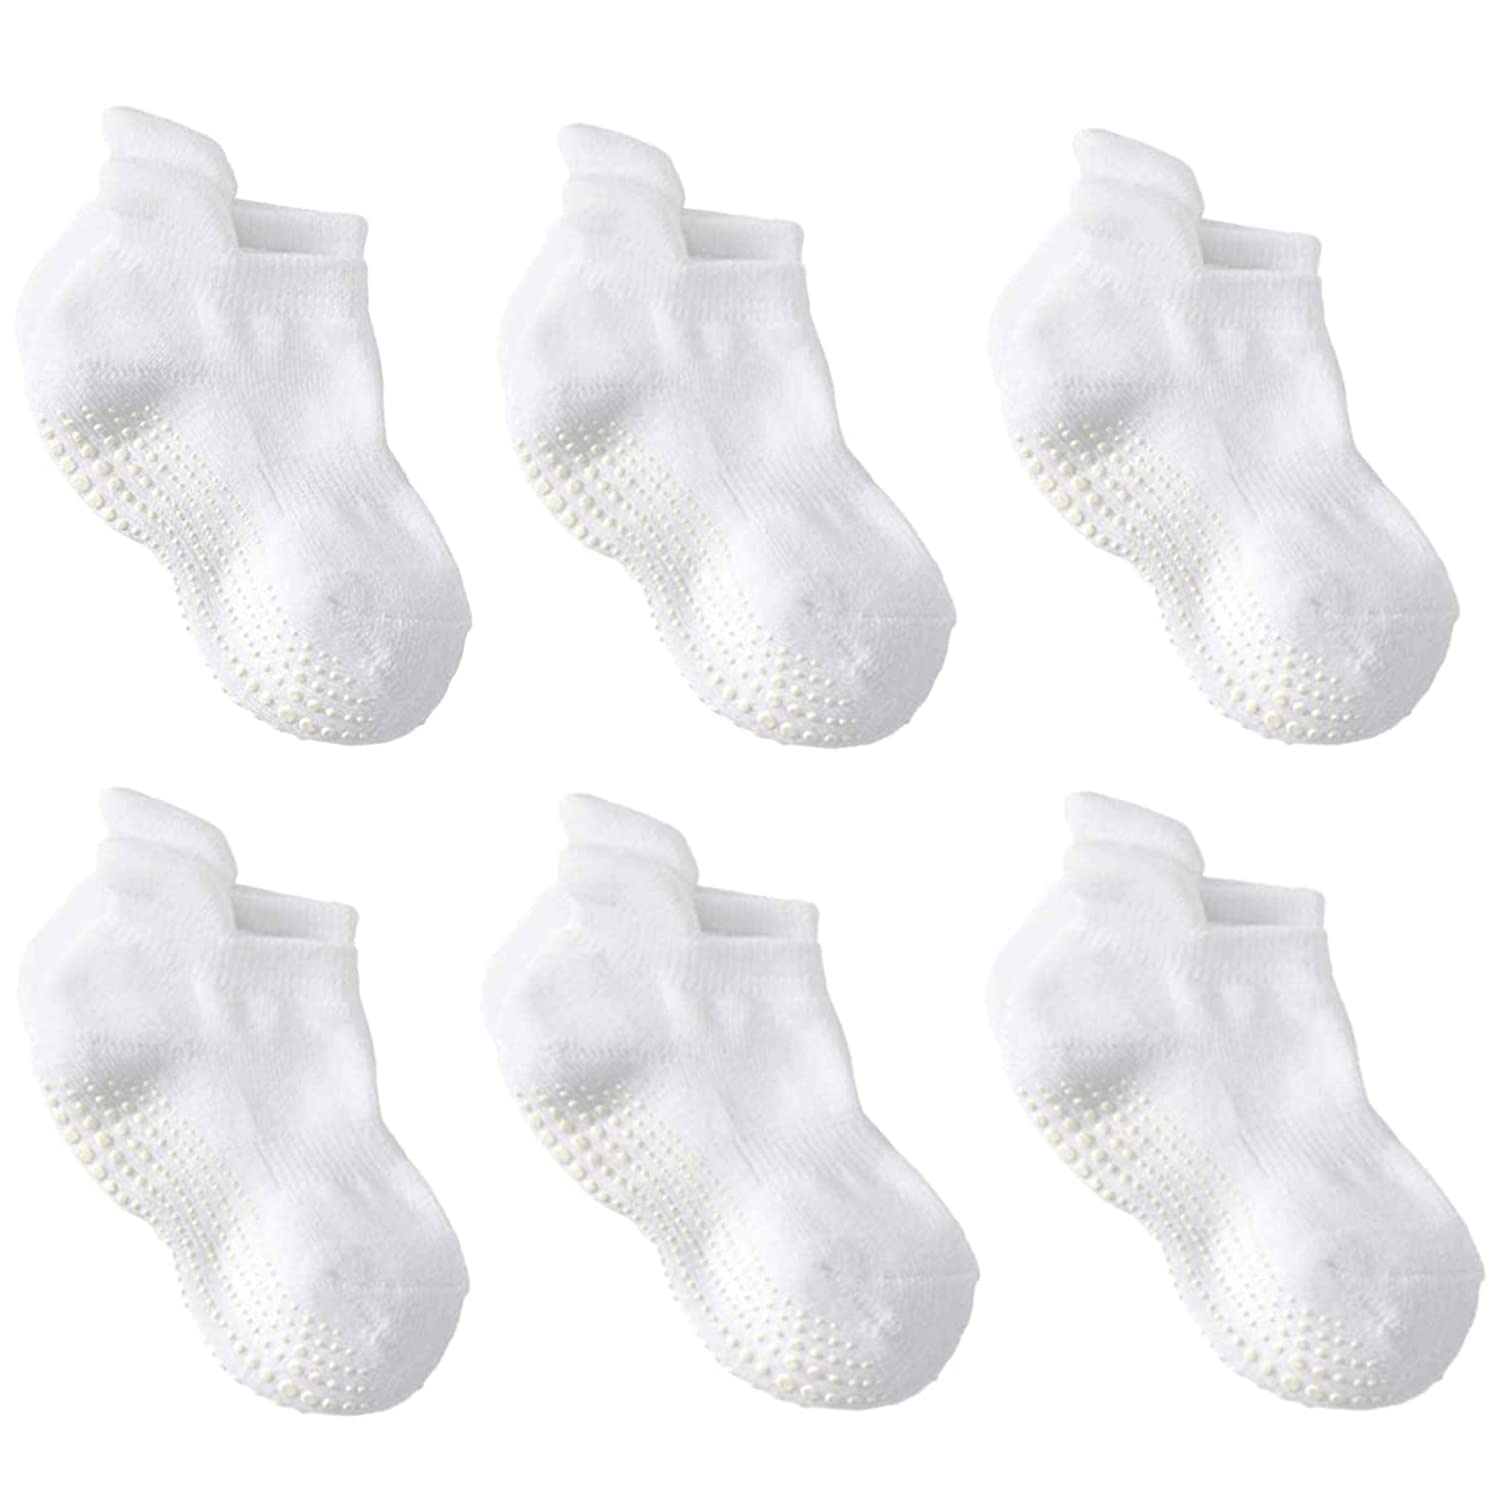 LA ACTIVE Non Slip Grip Ankle Boys and Girls Socks for Babies Toddlers and Kids